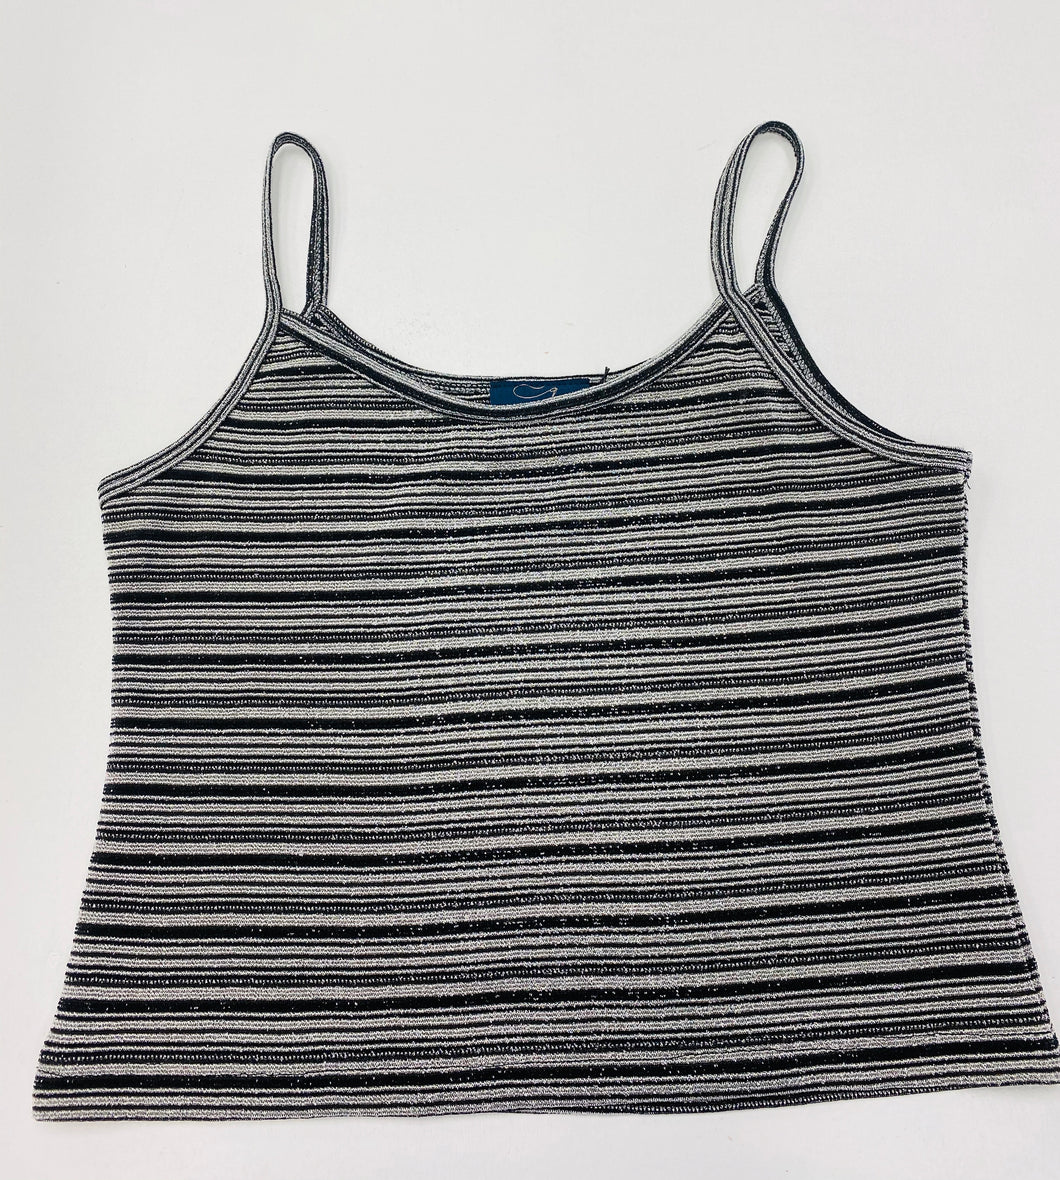 Tank Top Size Small